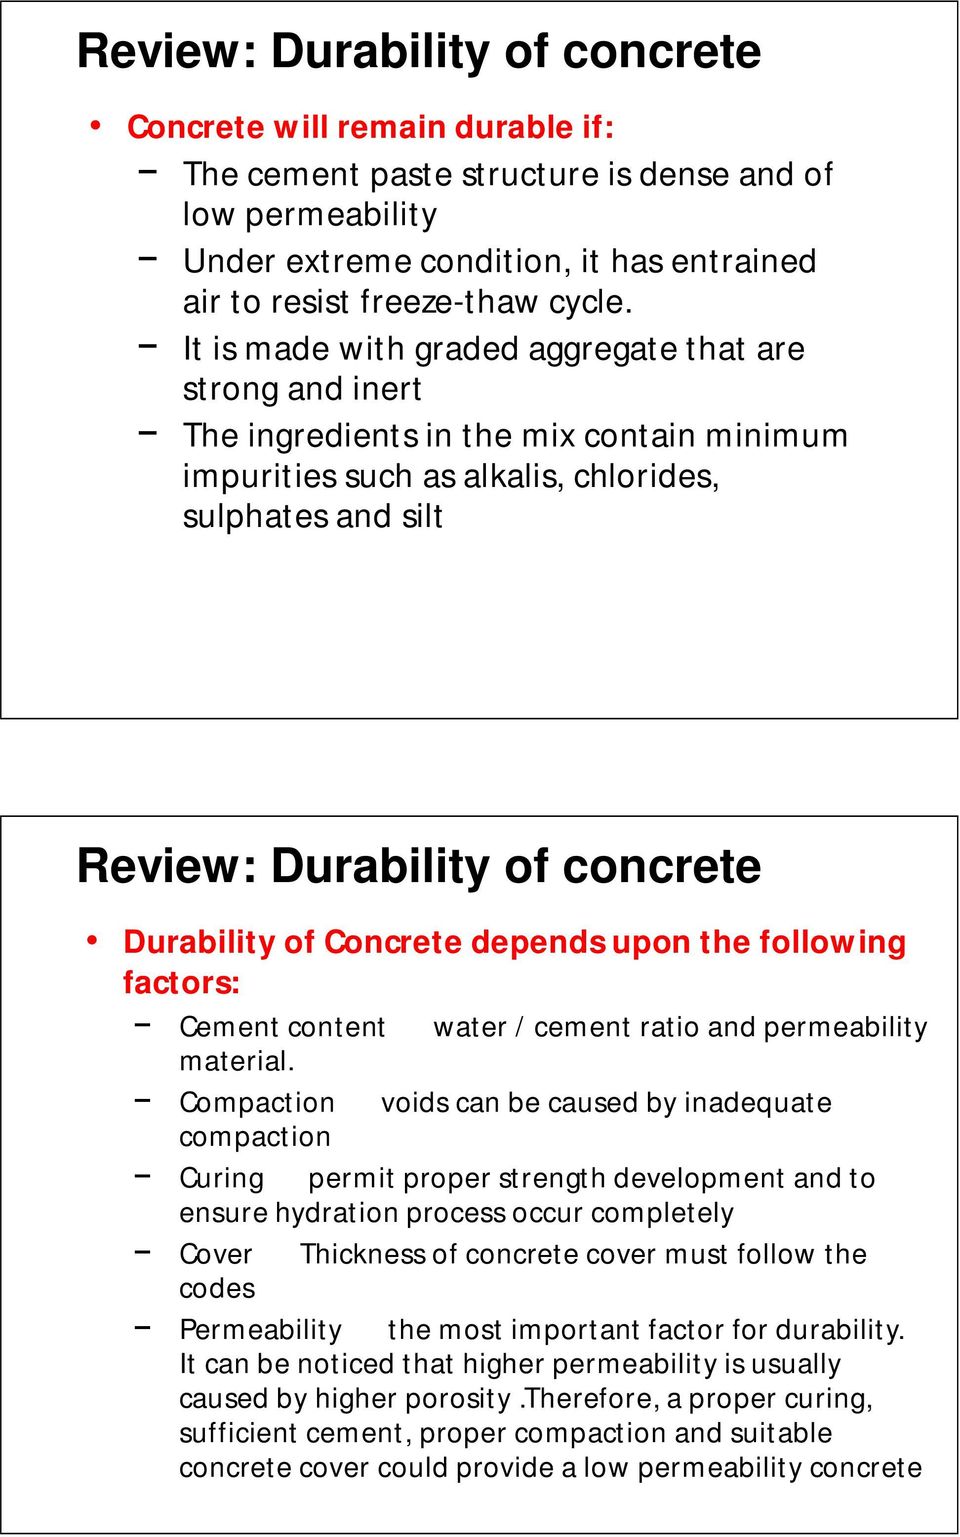 Durability of Concrete depends upon the following factors: Cement content water / cement ratio and permeability material.